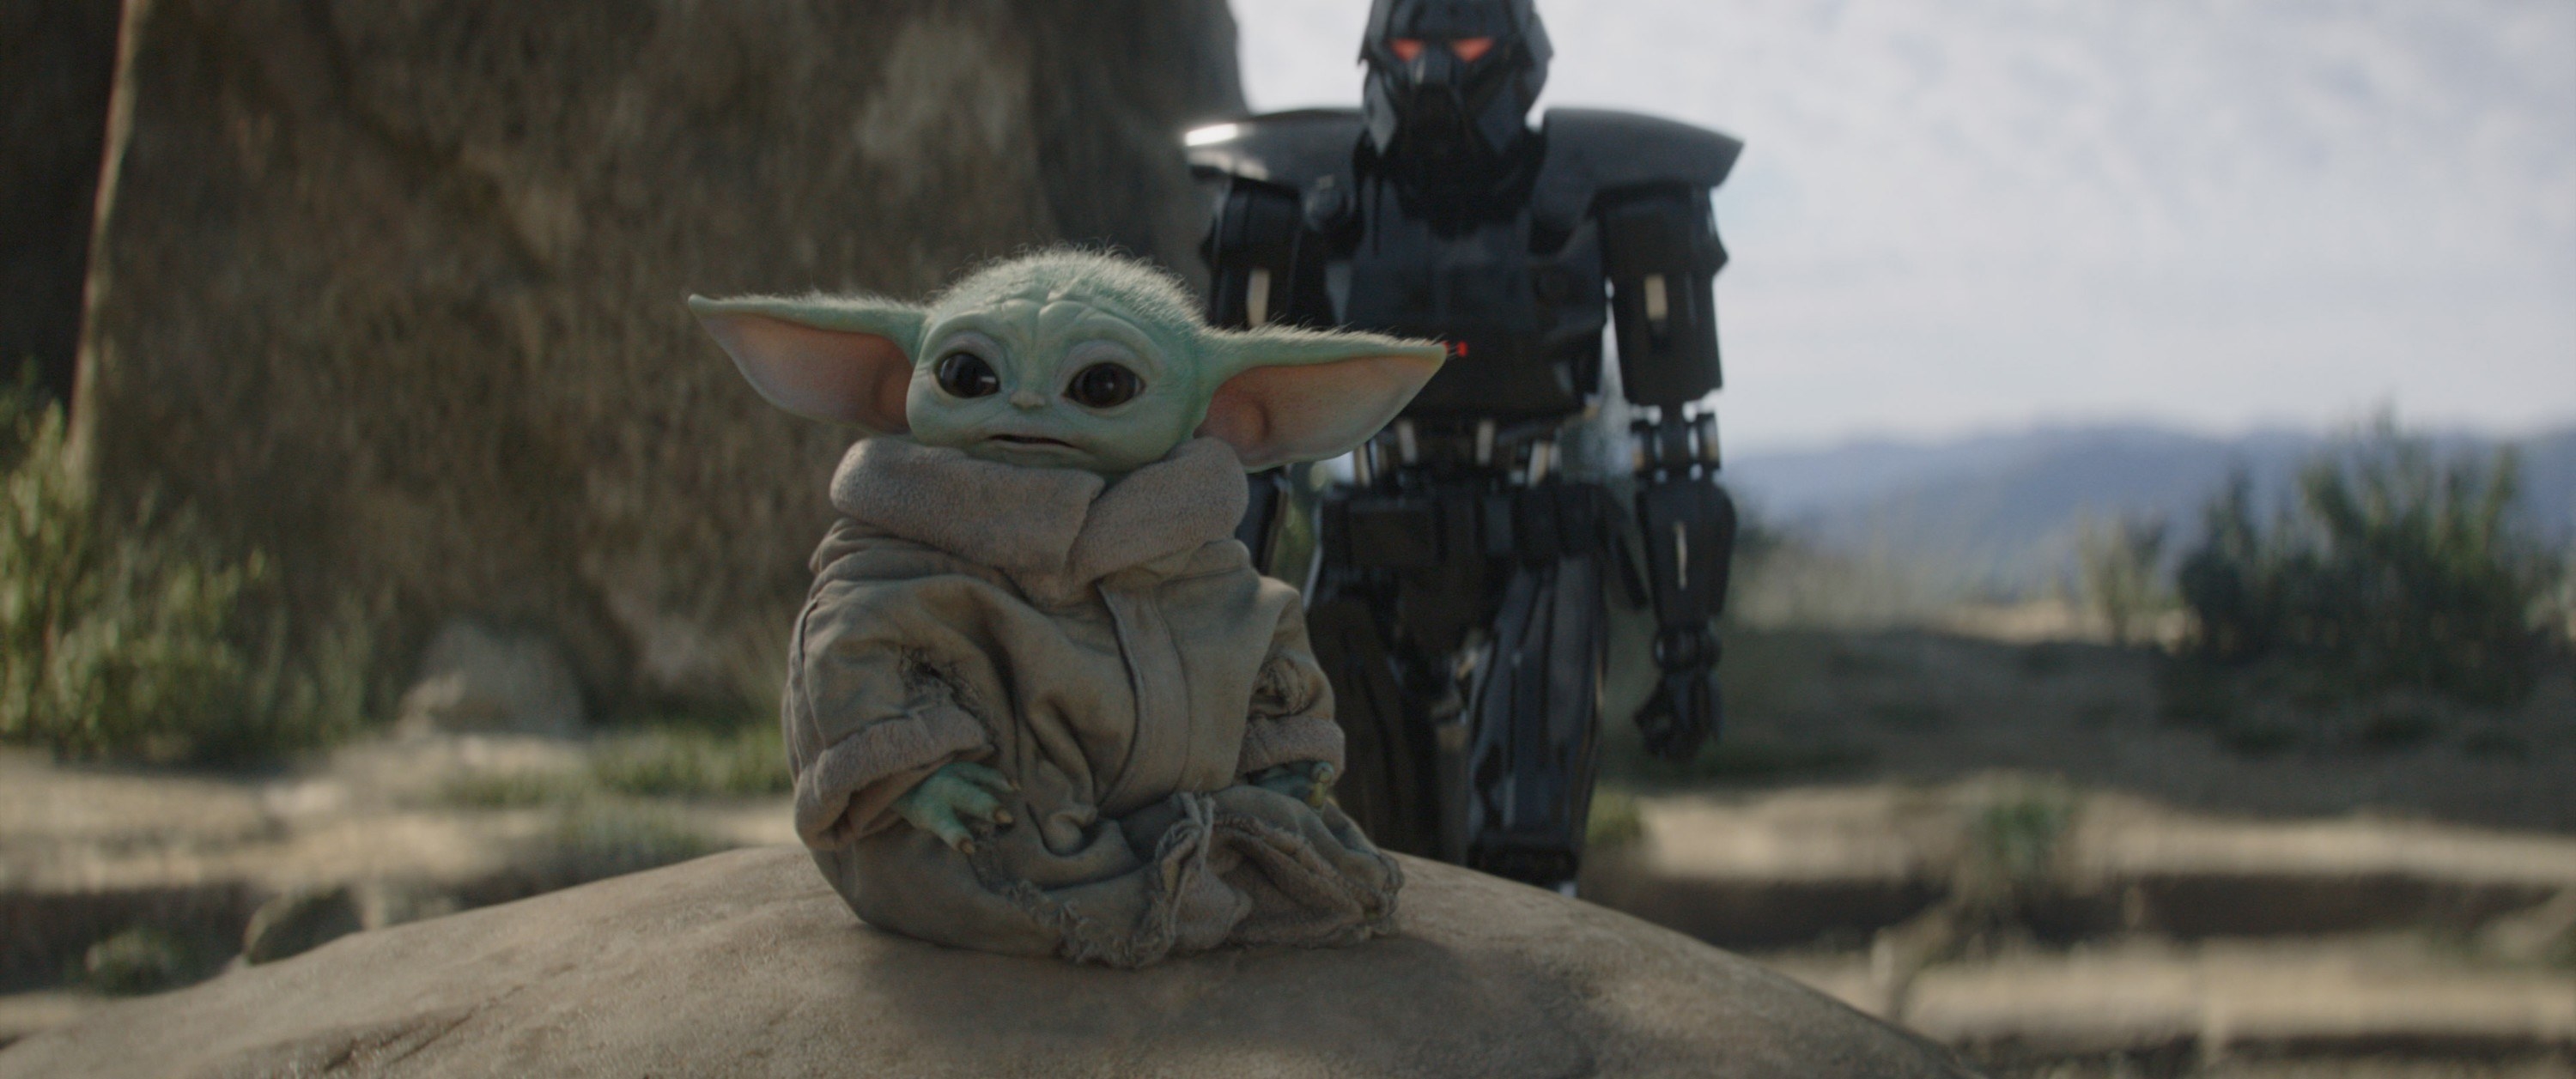 Baby Yoda looking off into the distance